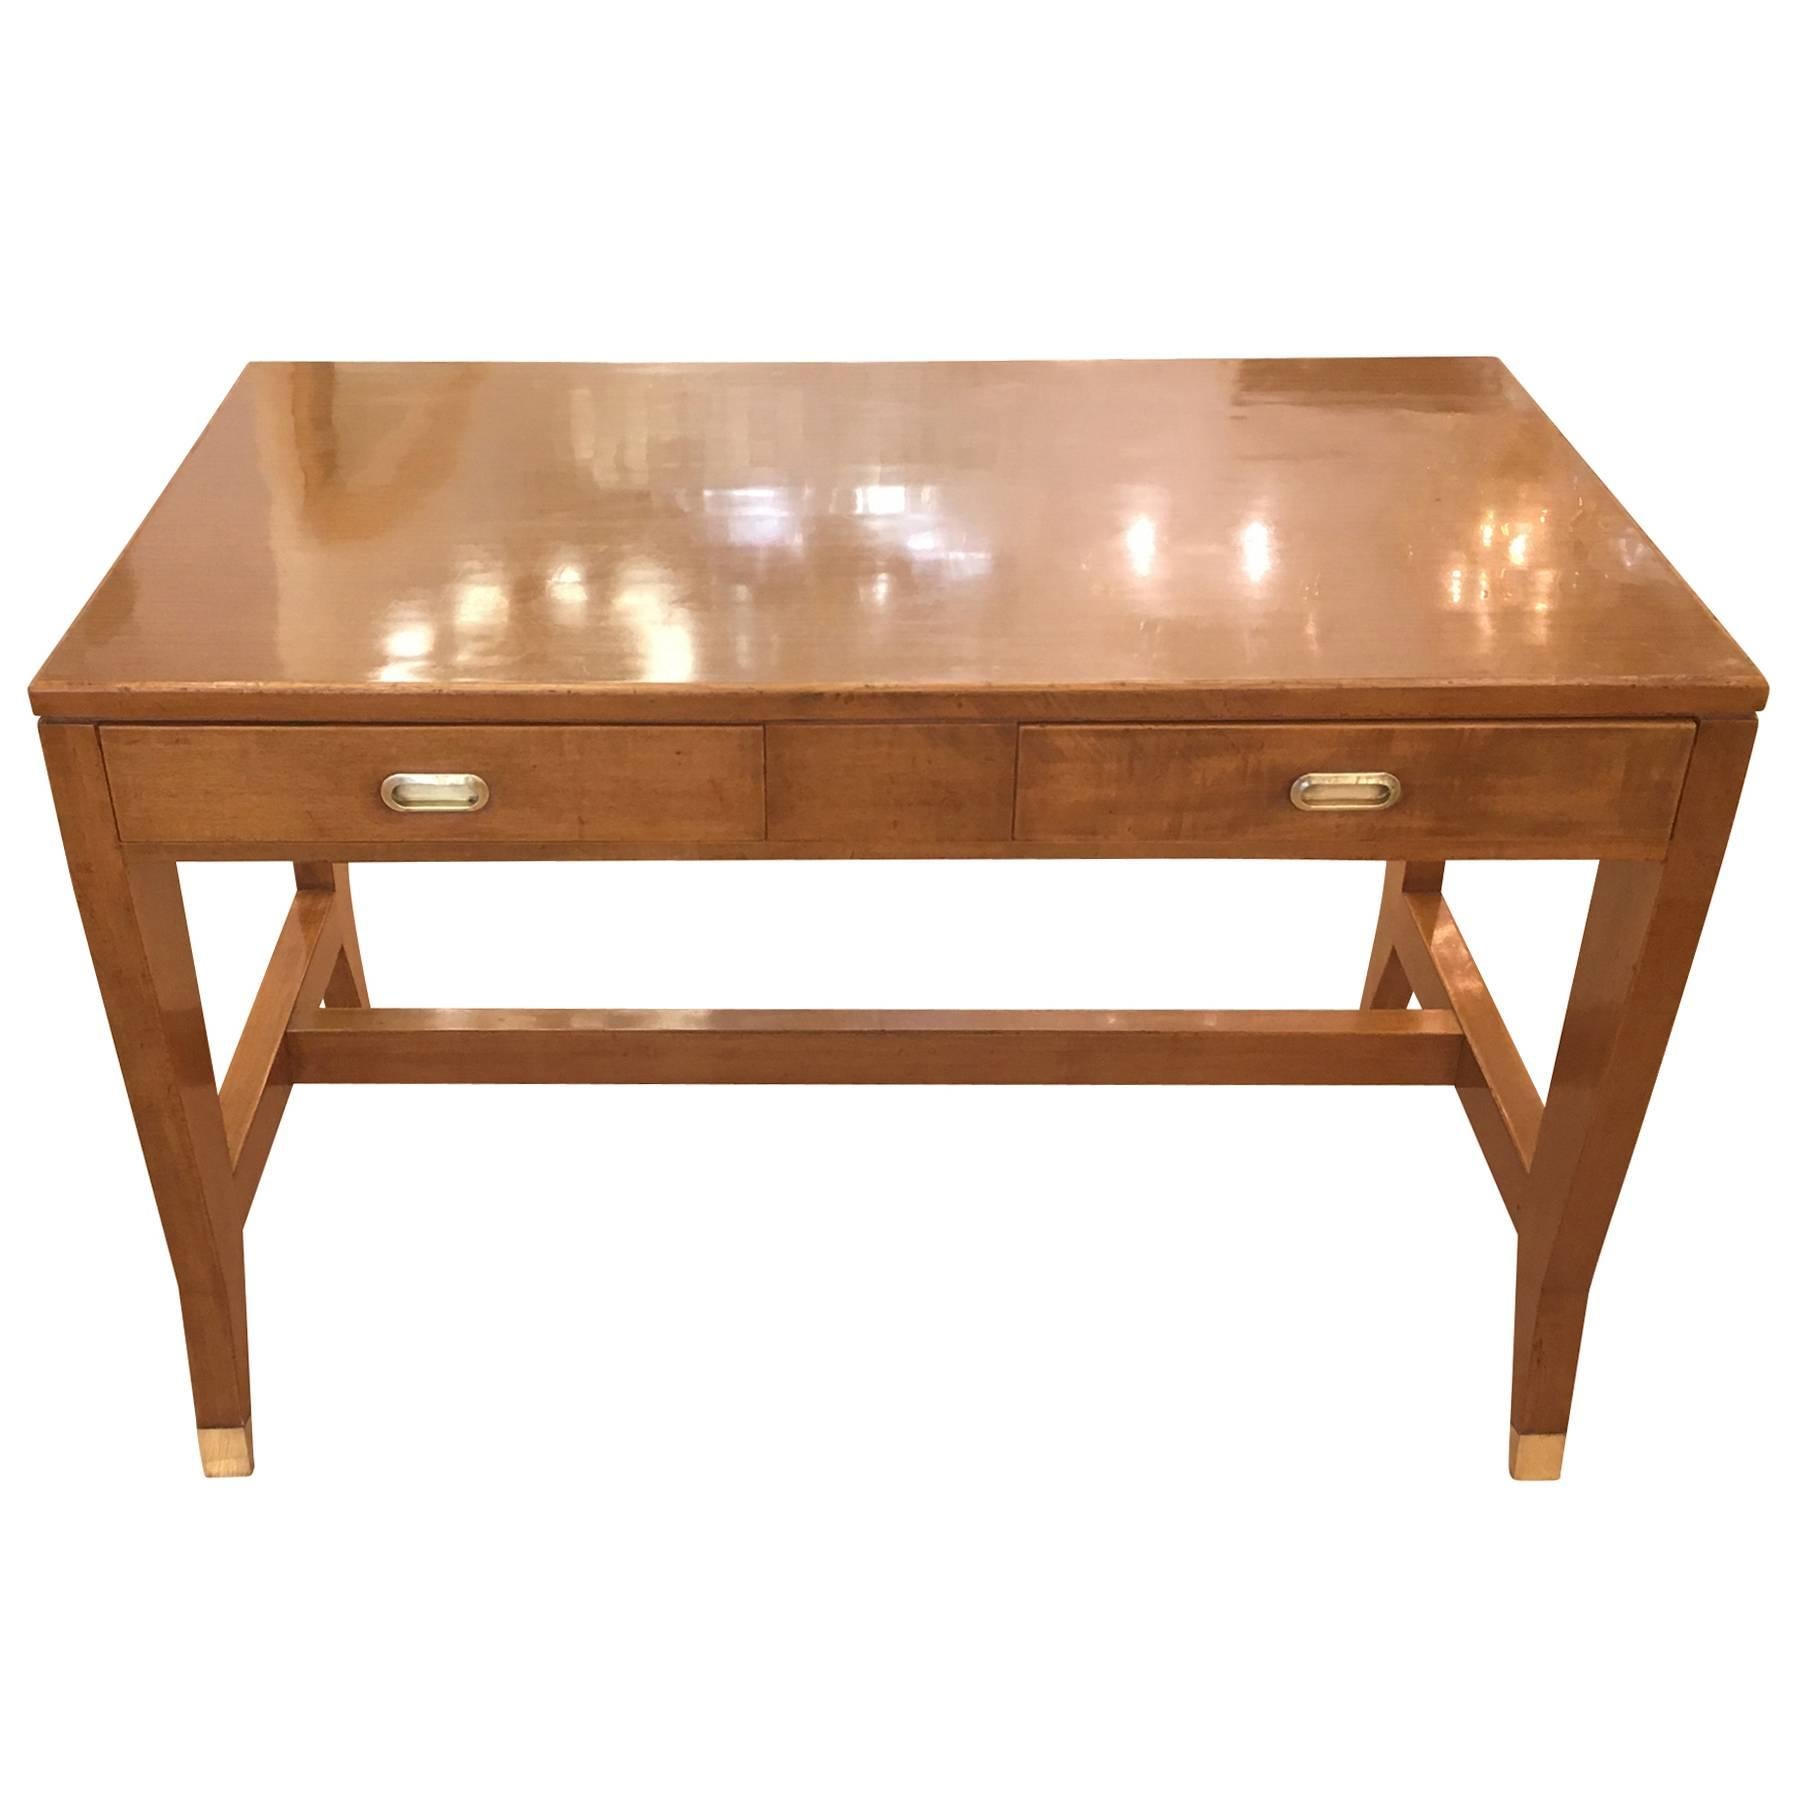 Beautiful walnut desk by Gio Ponti for the Banca Nazionale del Lavoro in Mantova. The handles and feet are brass. Has been left in its charming original conditions but can be re-finished in a different color for an additional cost.
